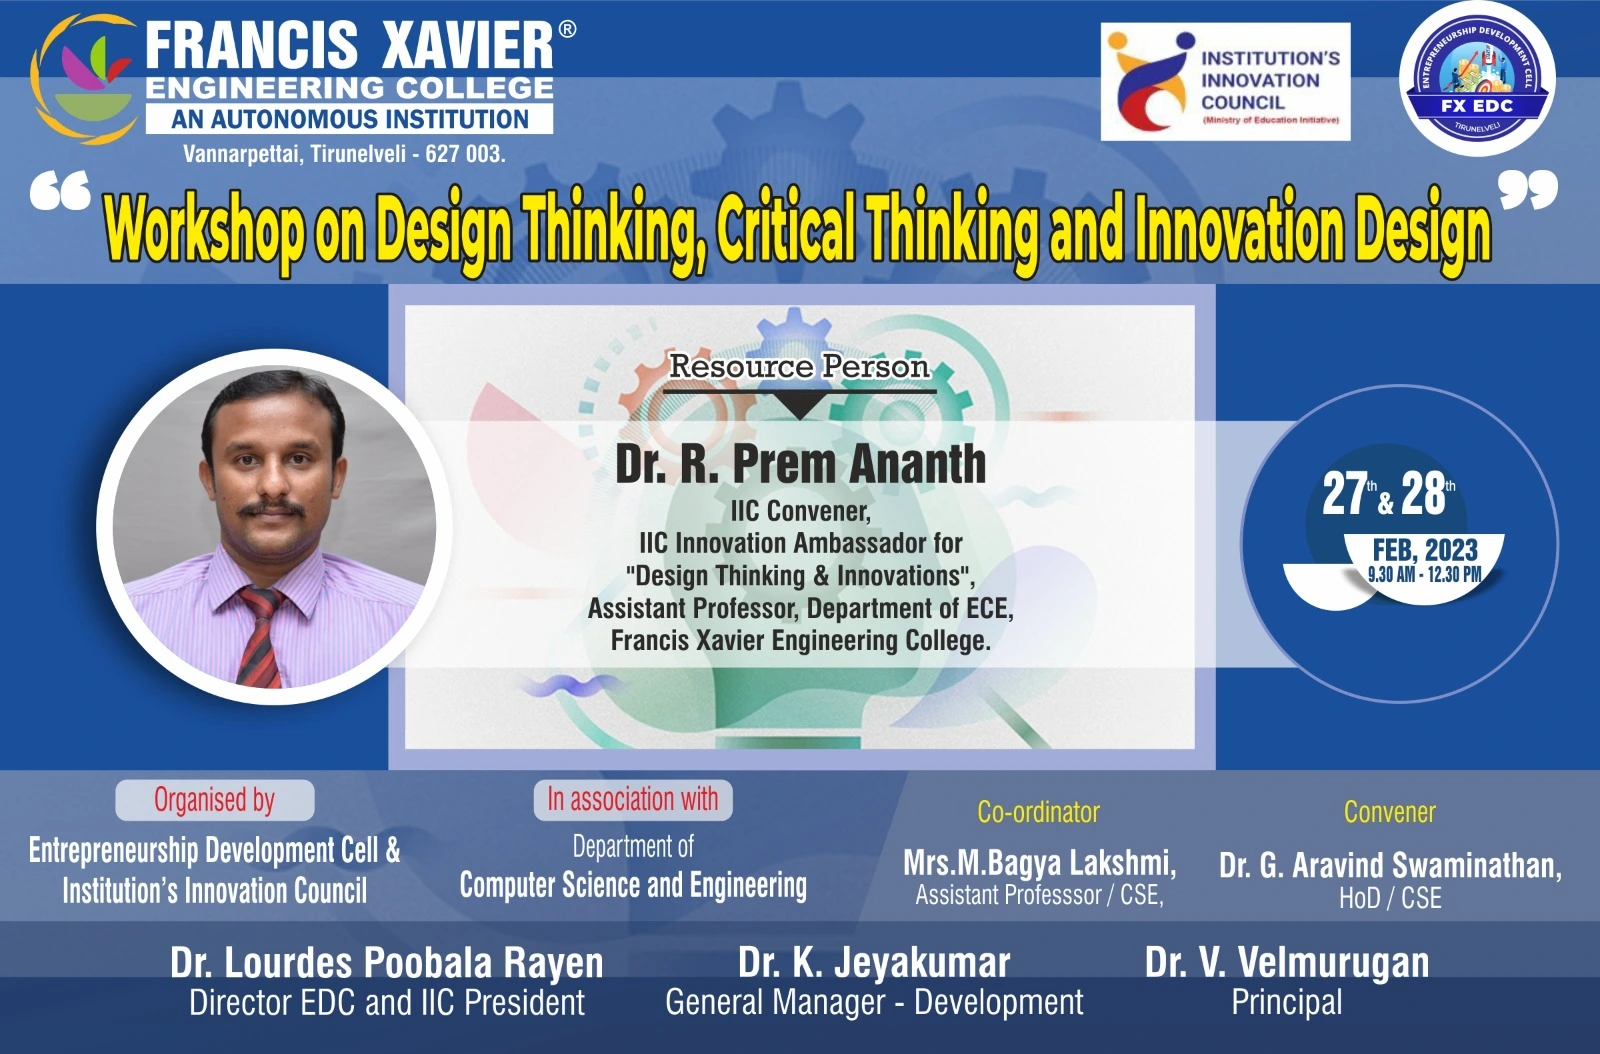 Workshop on Design Thinking, Critical Thinking and Innovation Design